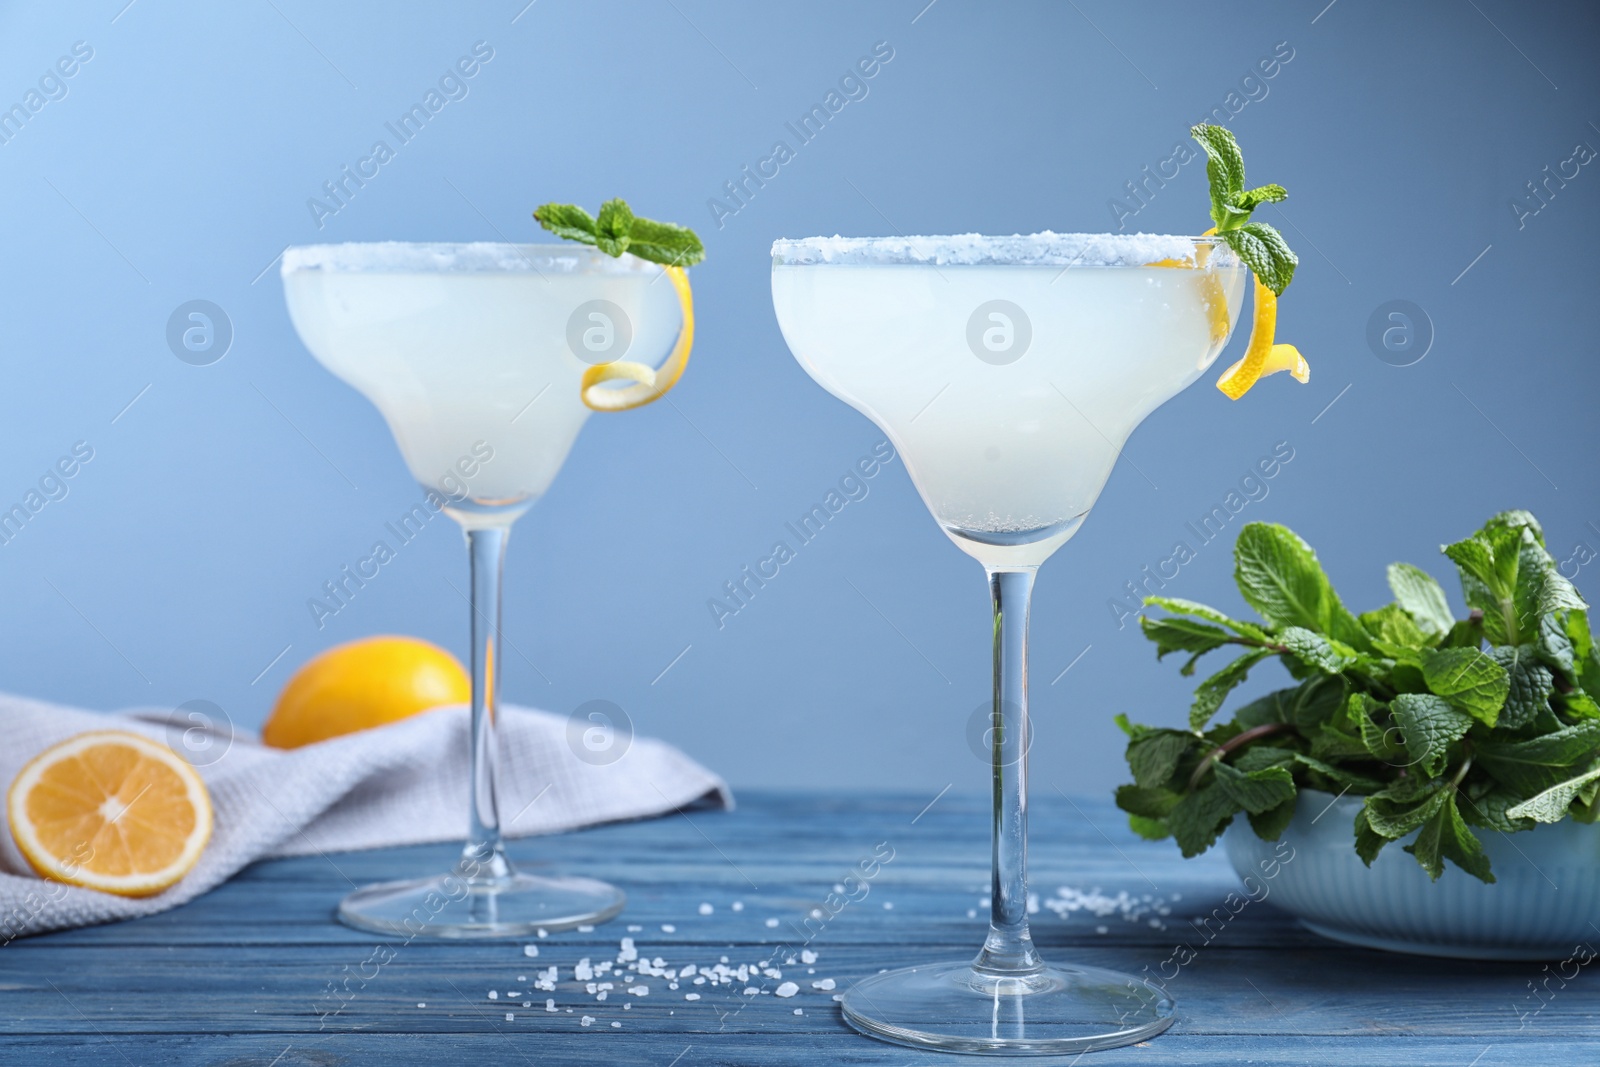 Photo of Glasses of tasty Margarita cocktail on blue wooden table